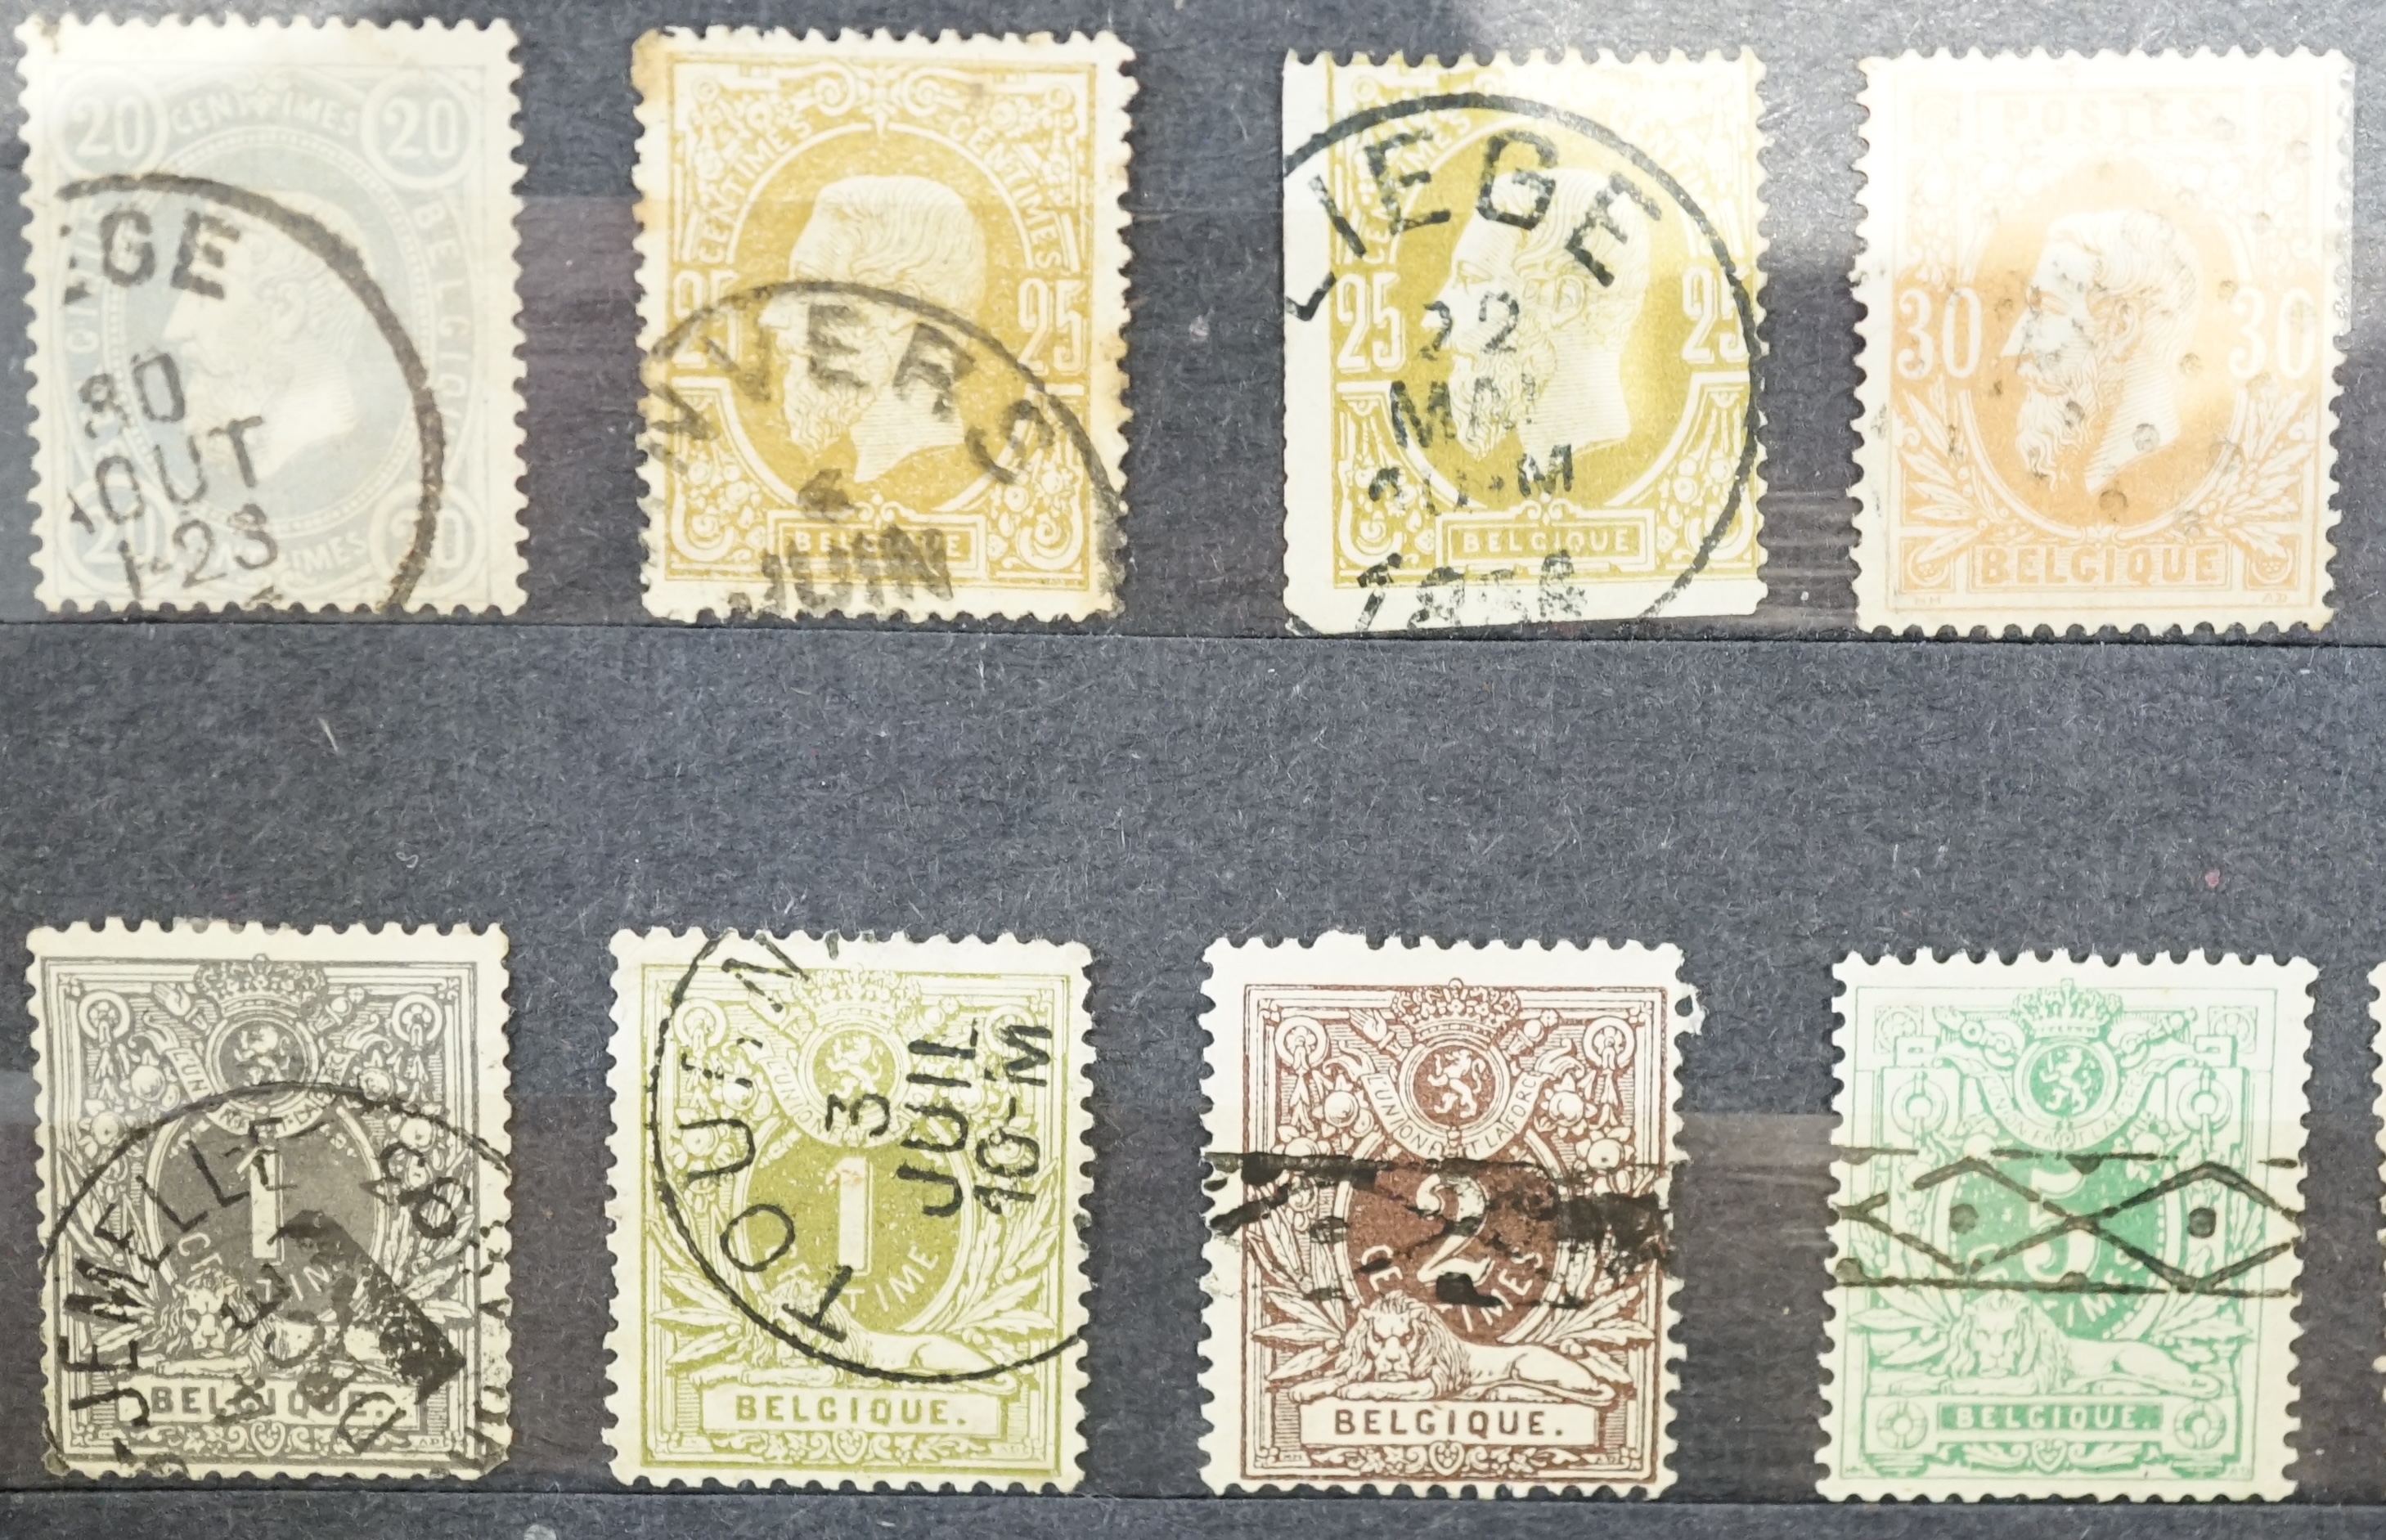 Two albums of assorted stamps including British covers, Belgium, etc.